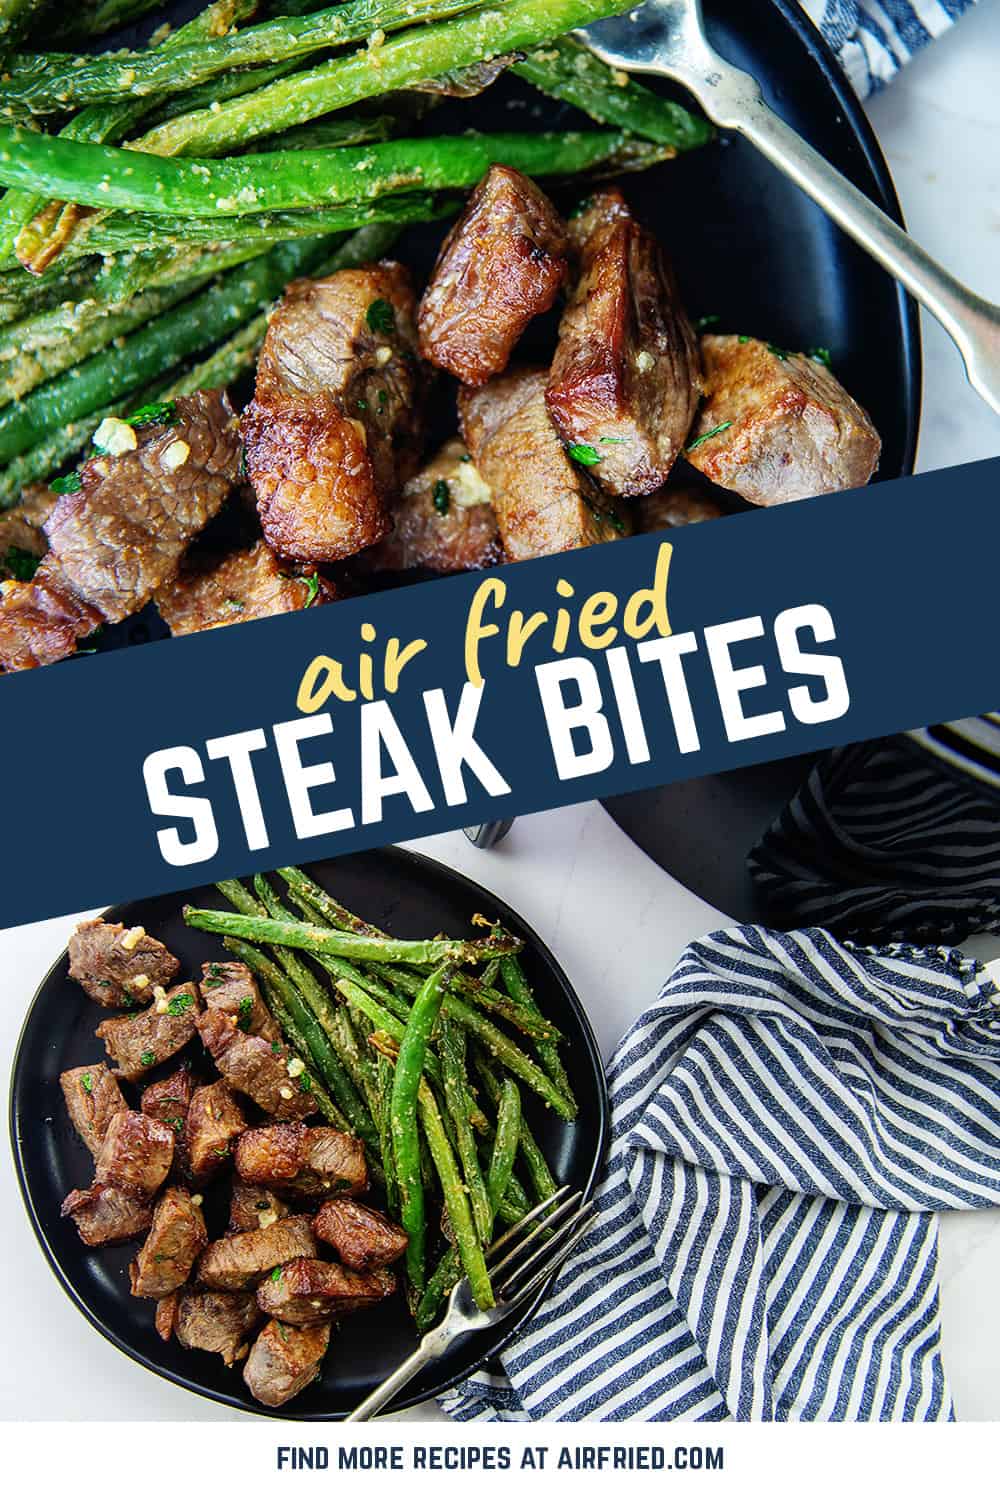 steak bites image with text for Pinterest.